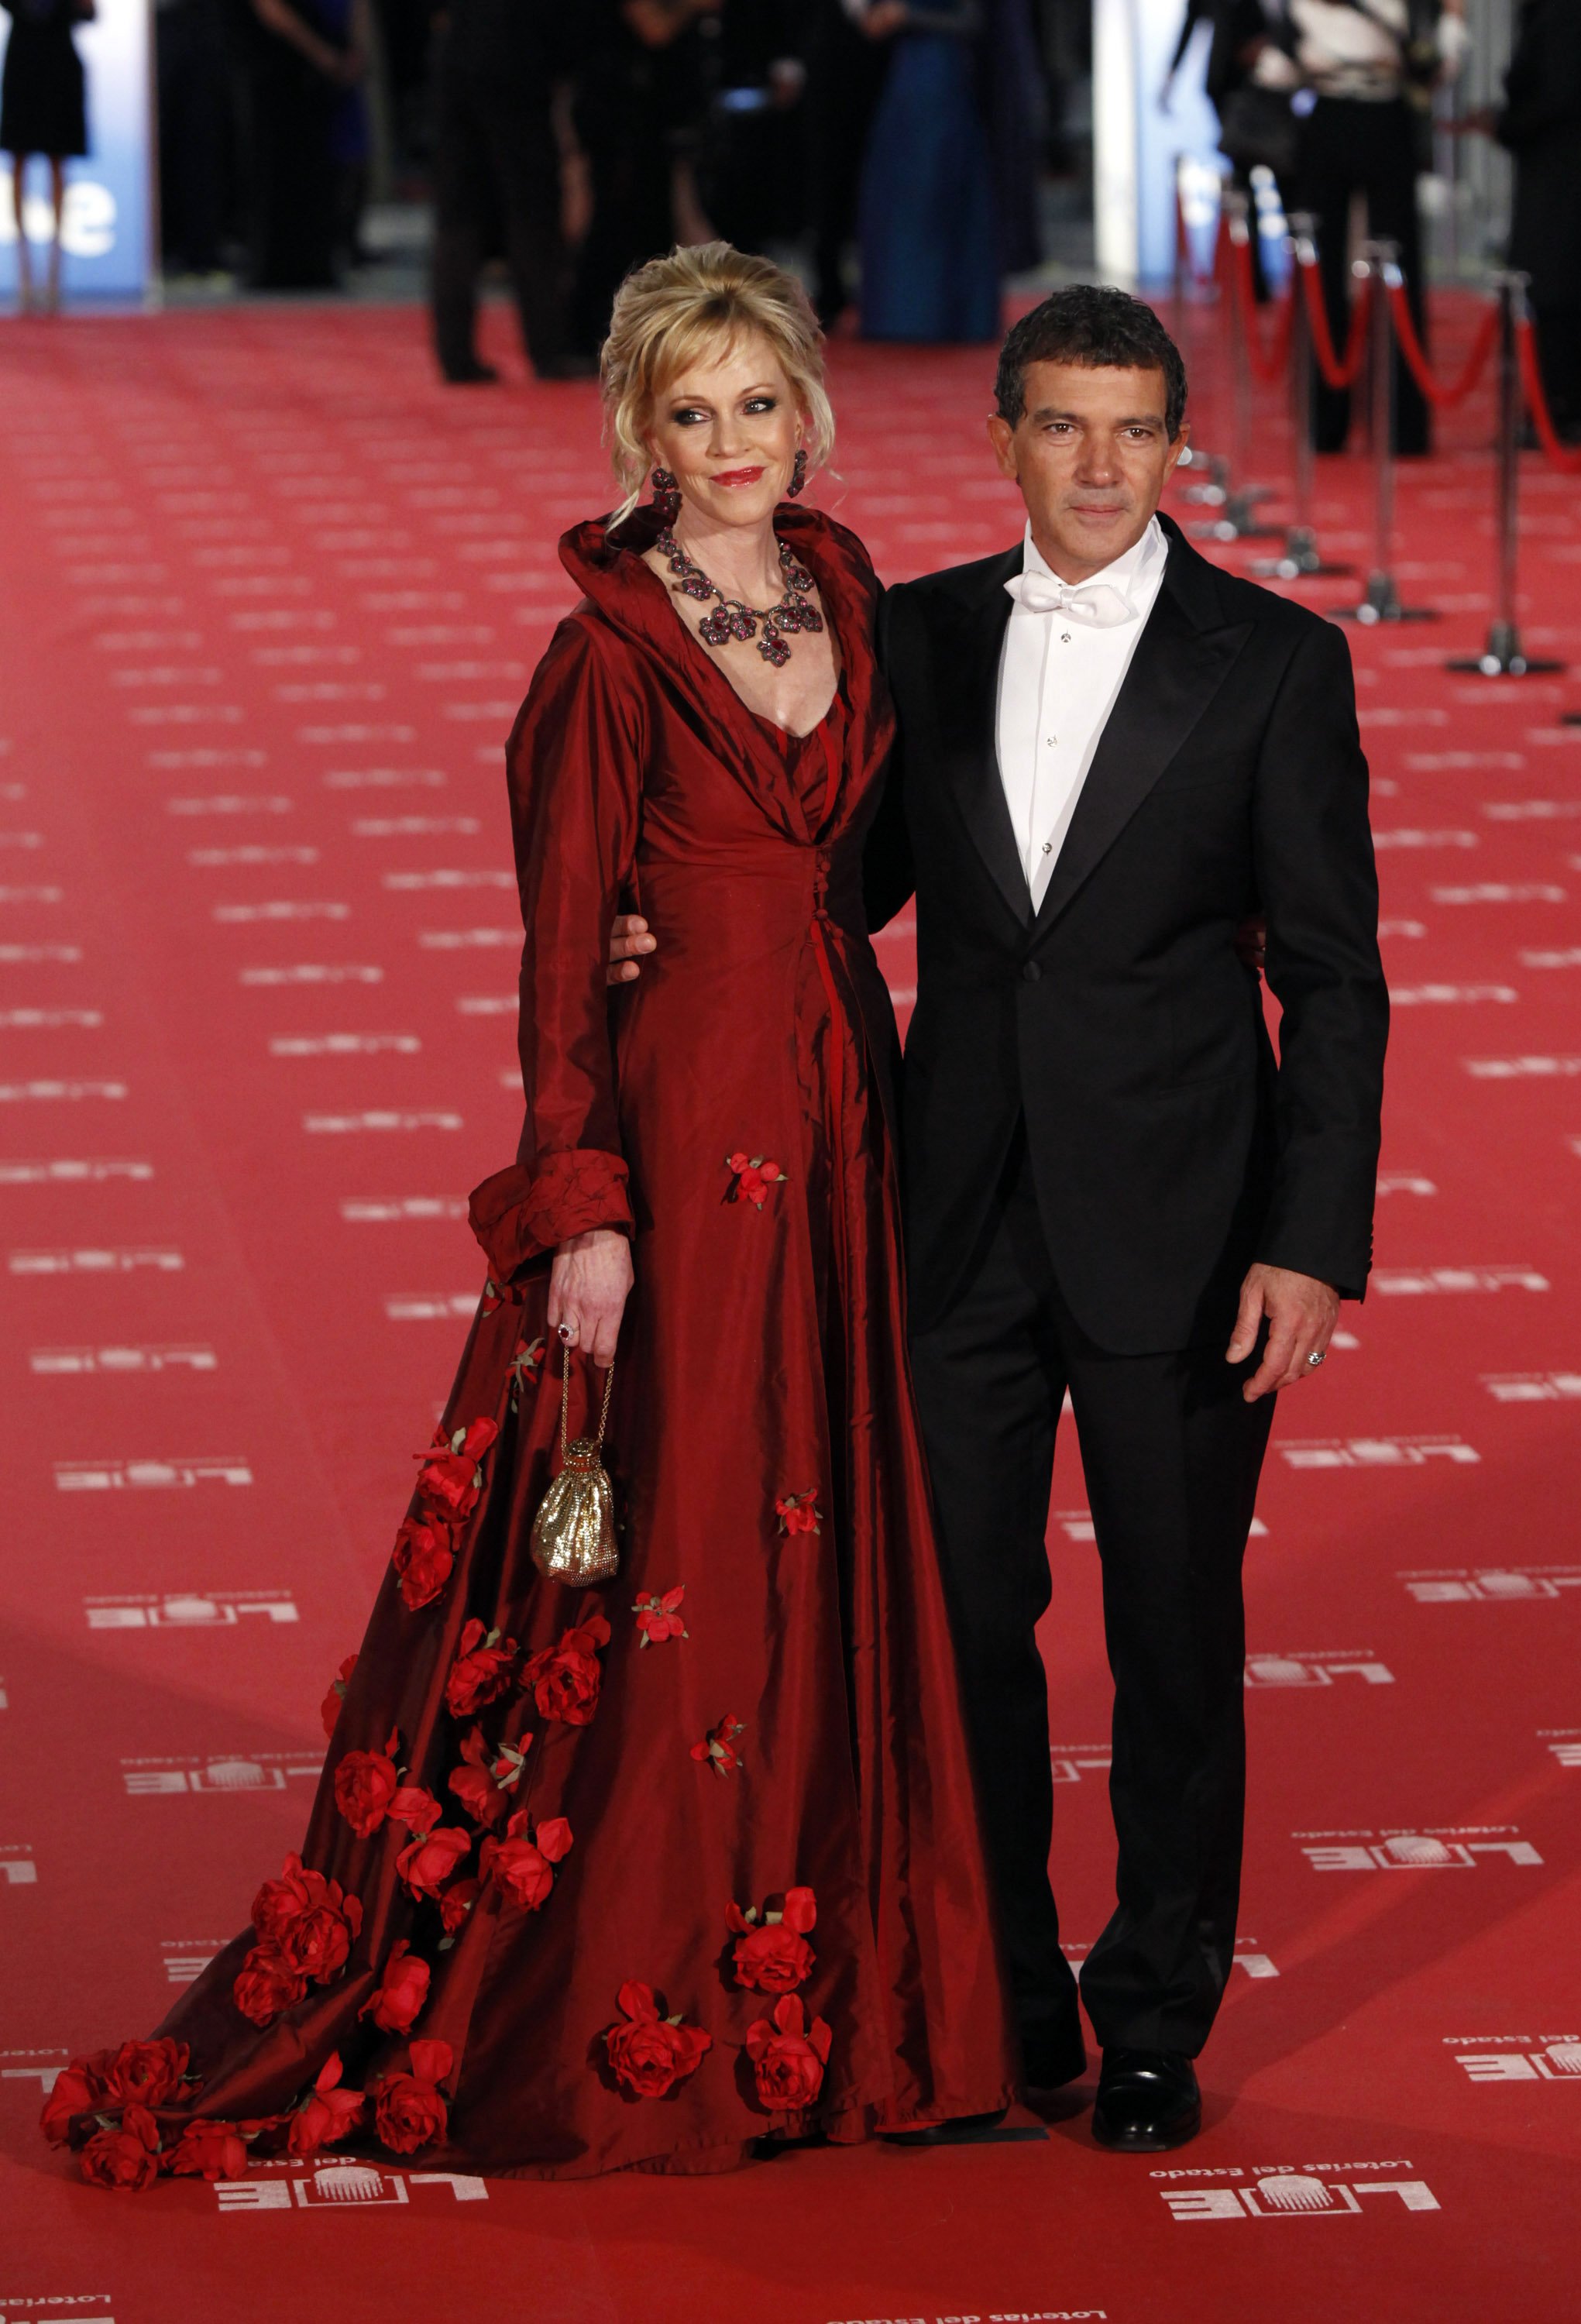 Melanie Griffith and Antonio Banderas arrive at the Goya Cinema Awards 2012 ceremony, at the Palacio Municipal de Congresos on February 19, 2012 in Madrid, Spain | Source: Getty Images